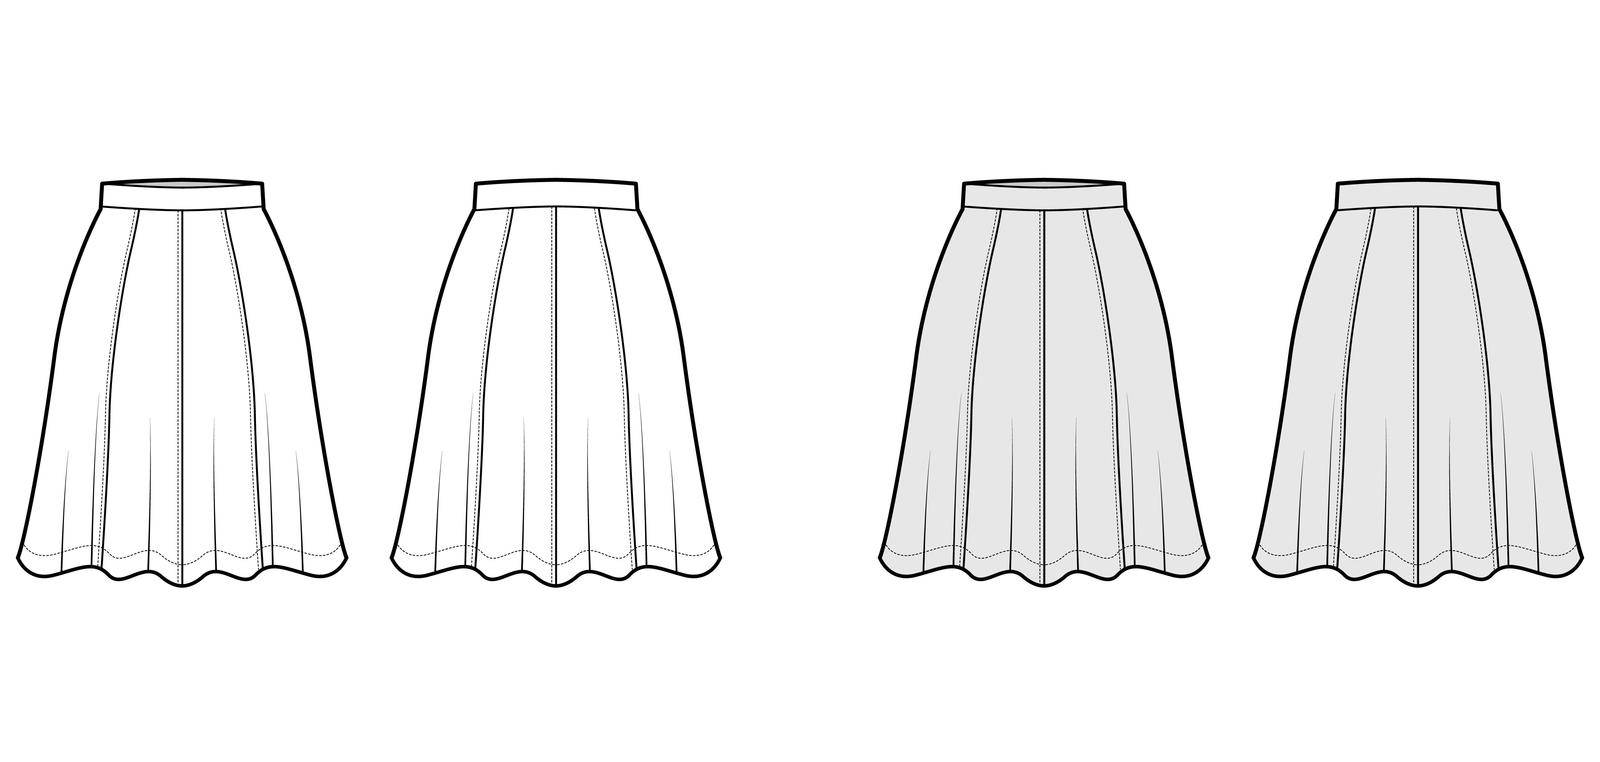 Skirt eight gore technical fashion illustration with below-the-knee silhouette, semi-circular fullness bottom template by Vectoressa